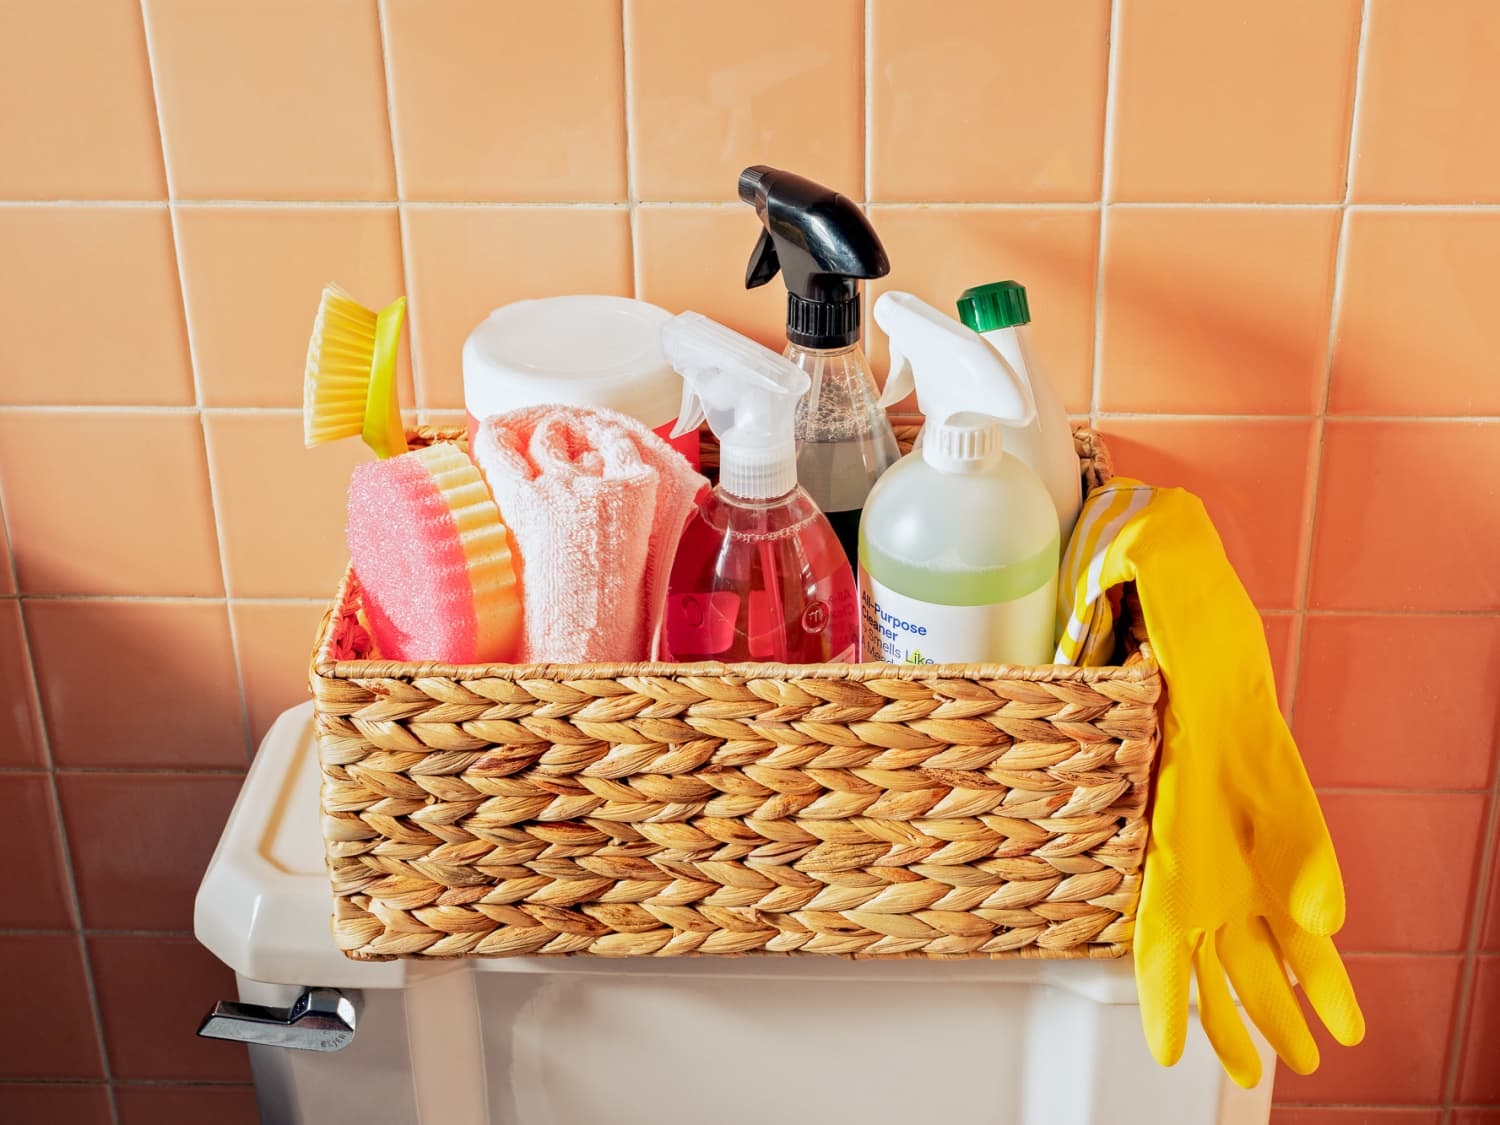 https://storables.com/wp-content/uploads/2023/10/how-to-store-bathroom-cleaning-supplies-1696603284.jpg